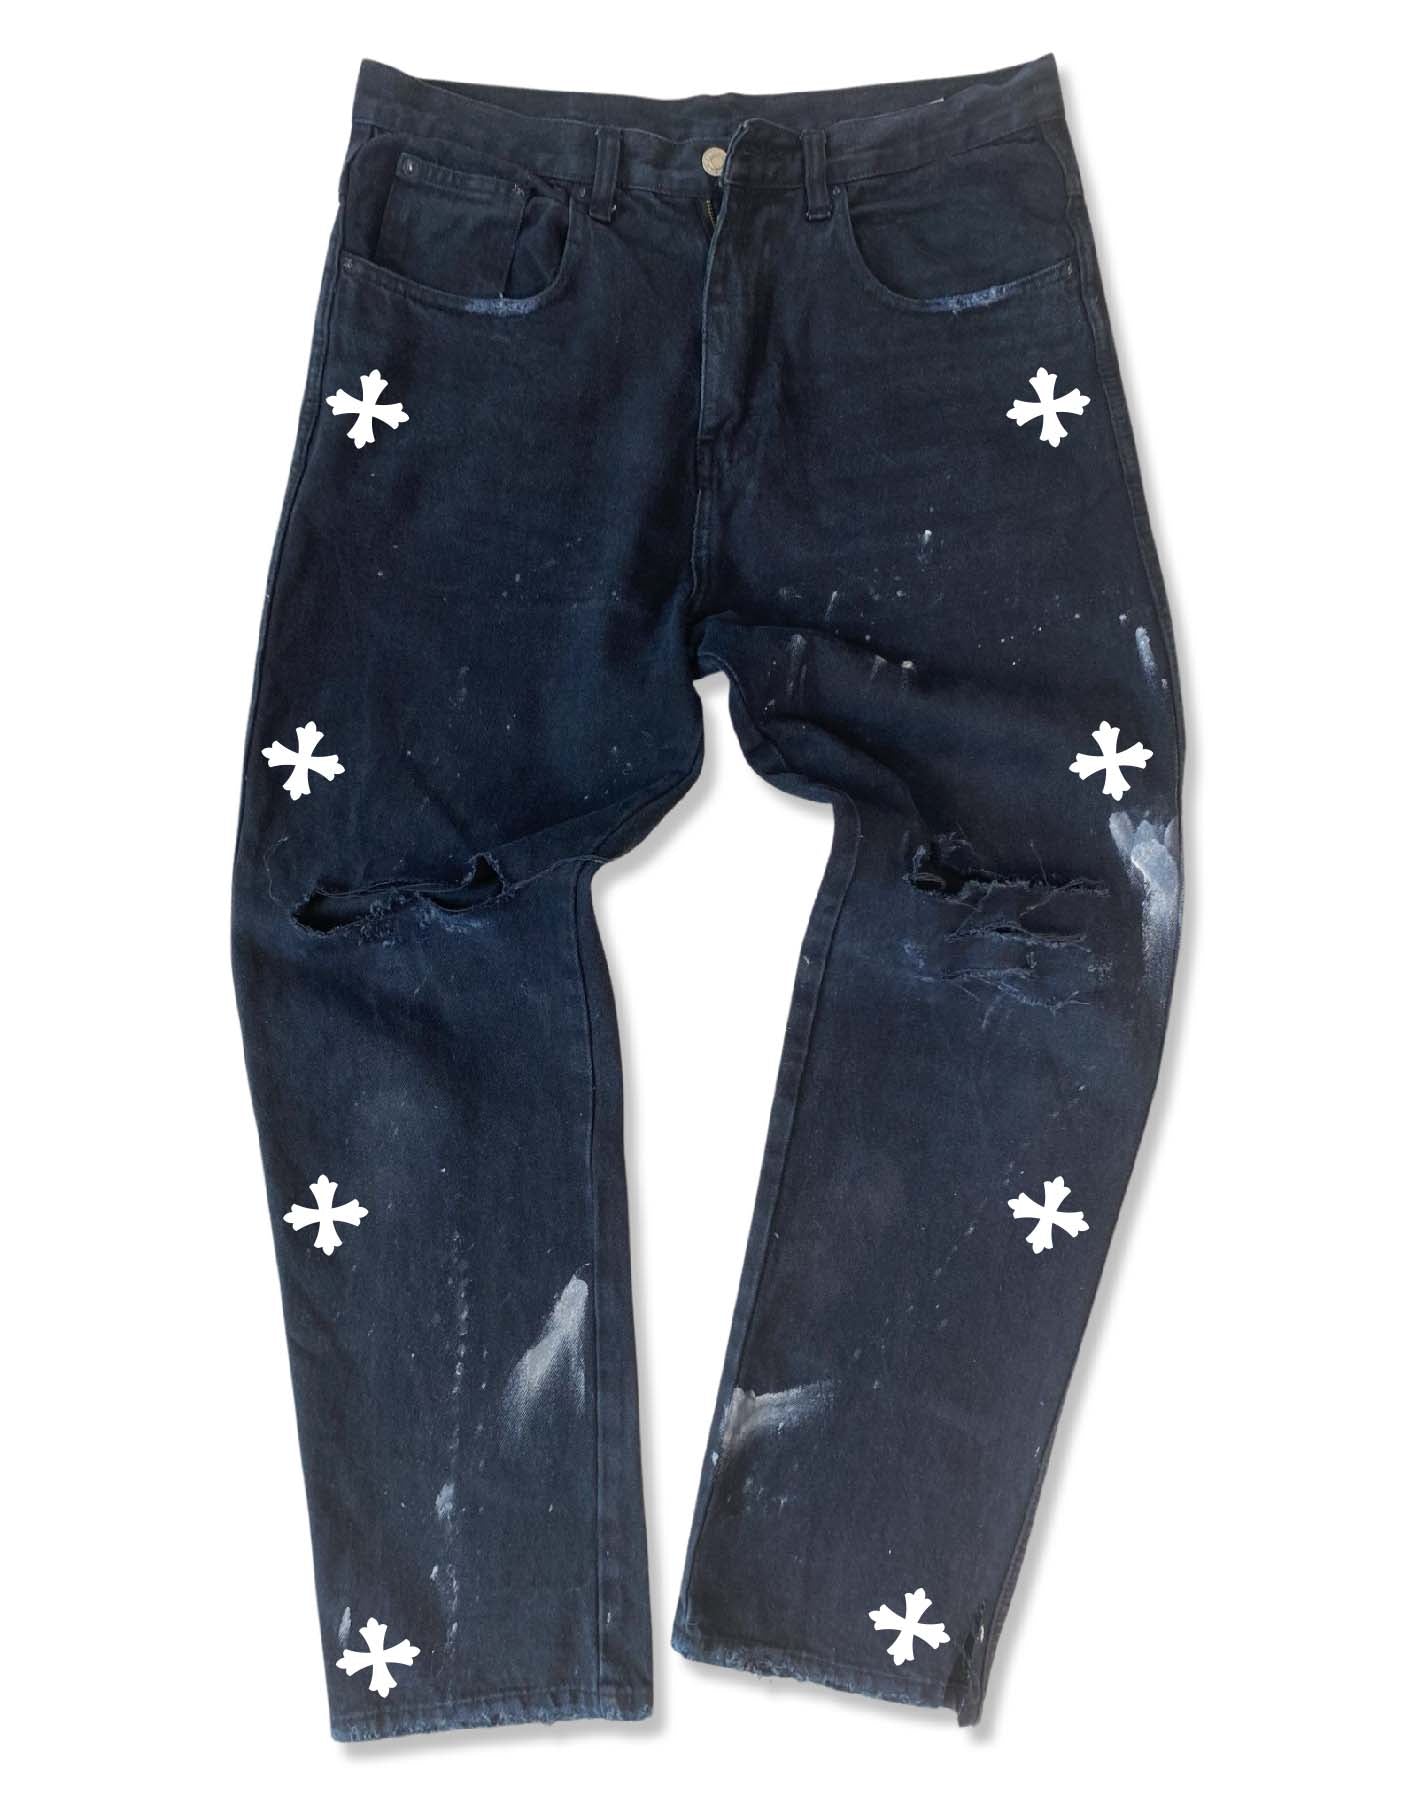 Destroyed Iron Jeans - Black